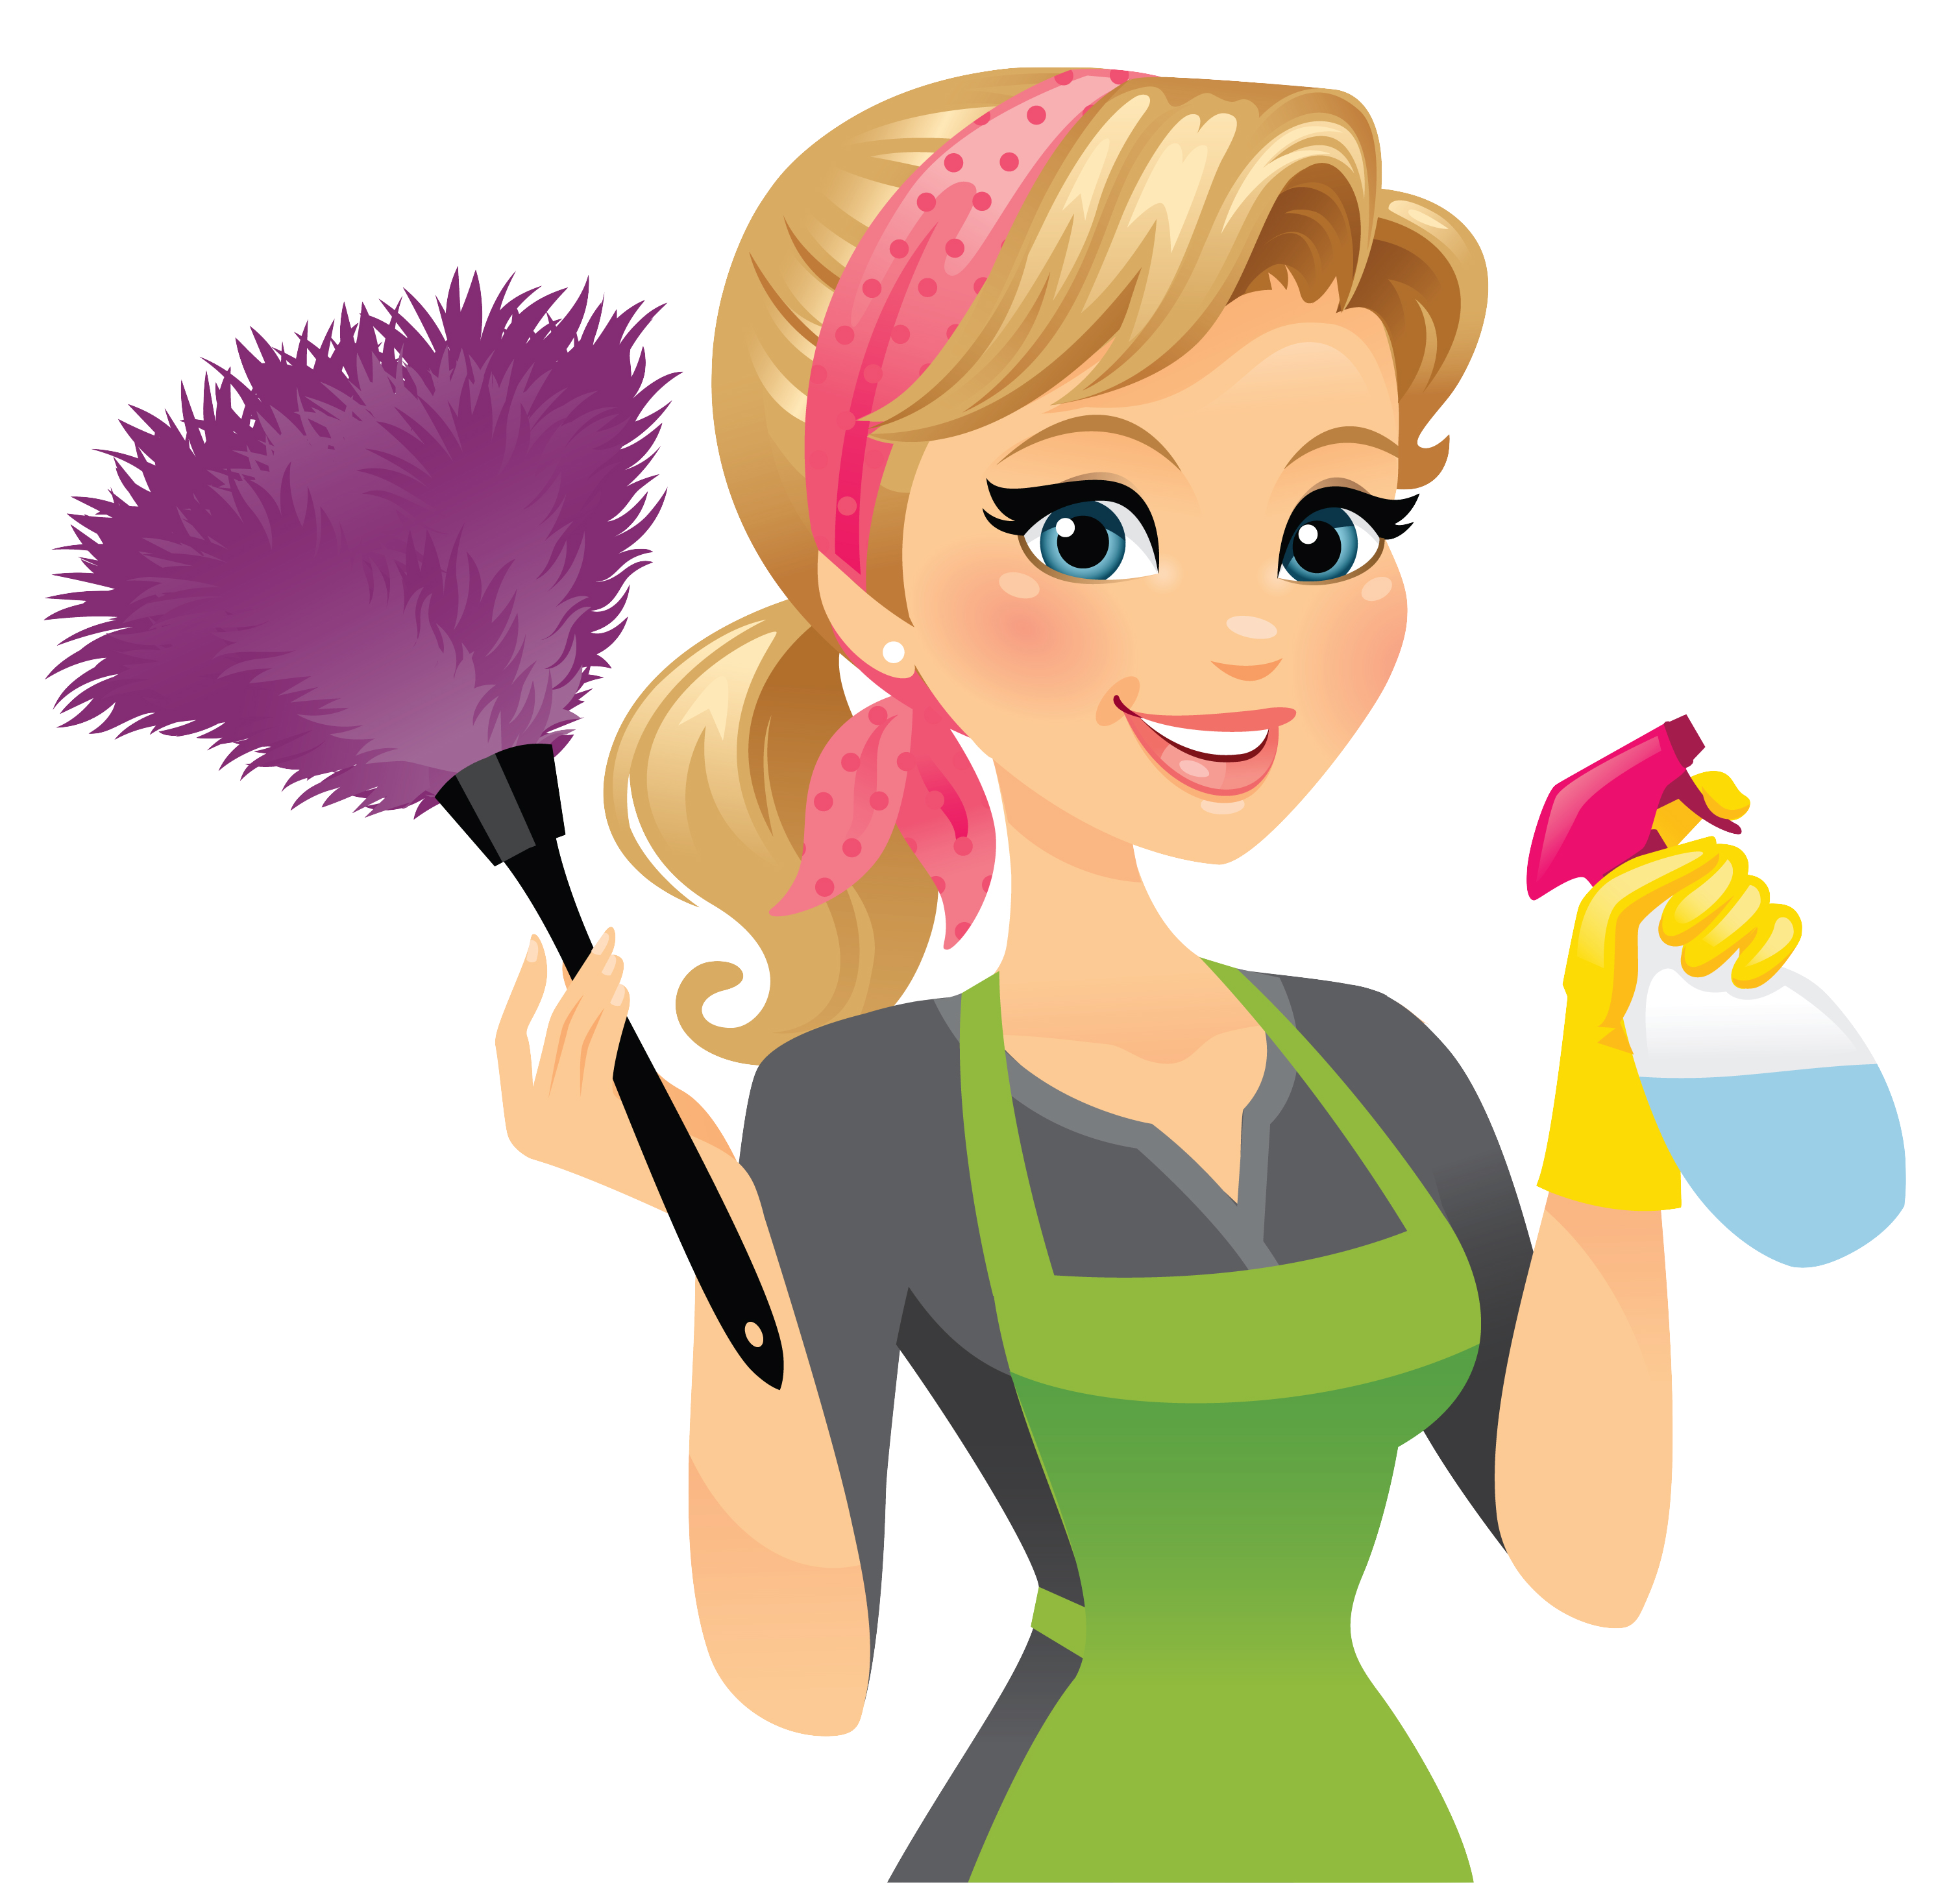 Cleaner cleaning clip art. Maid clipart maid service